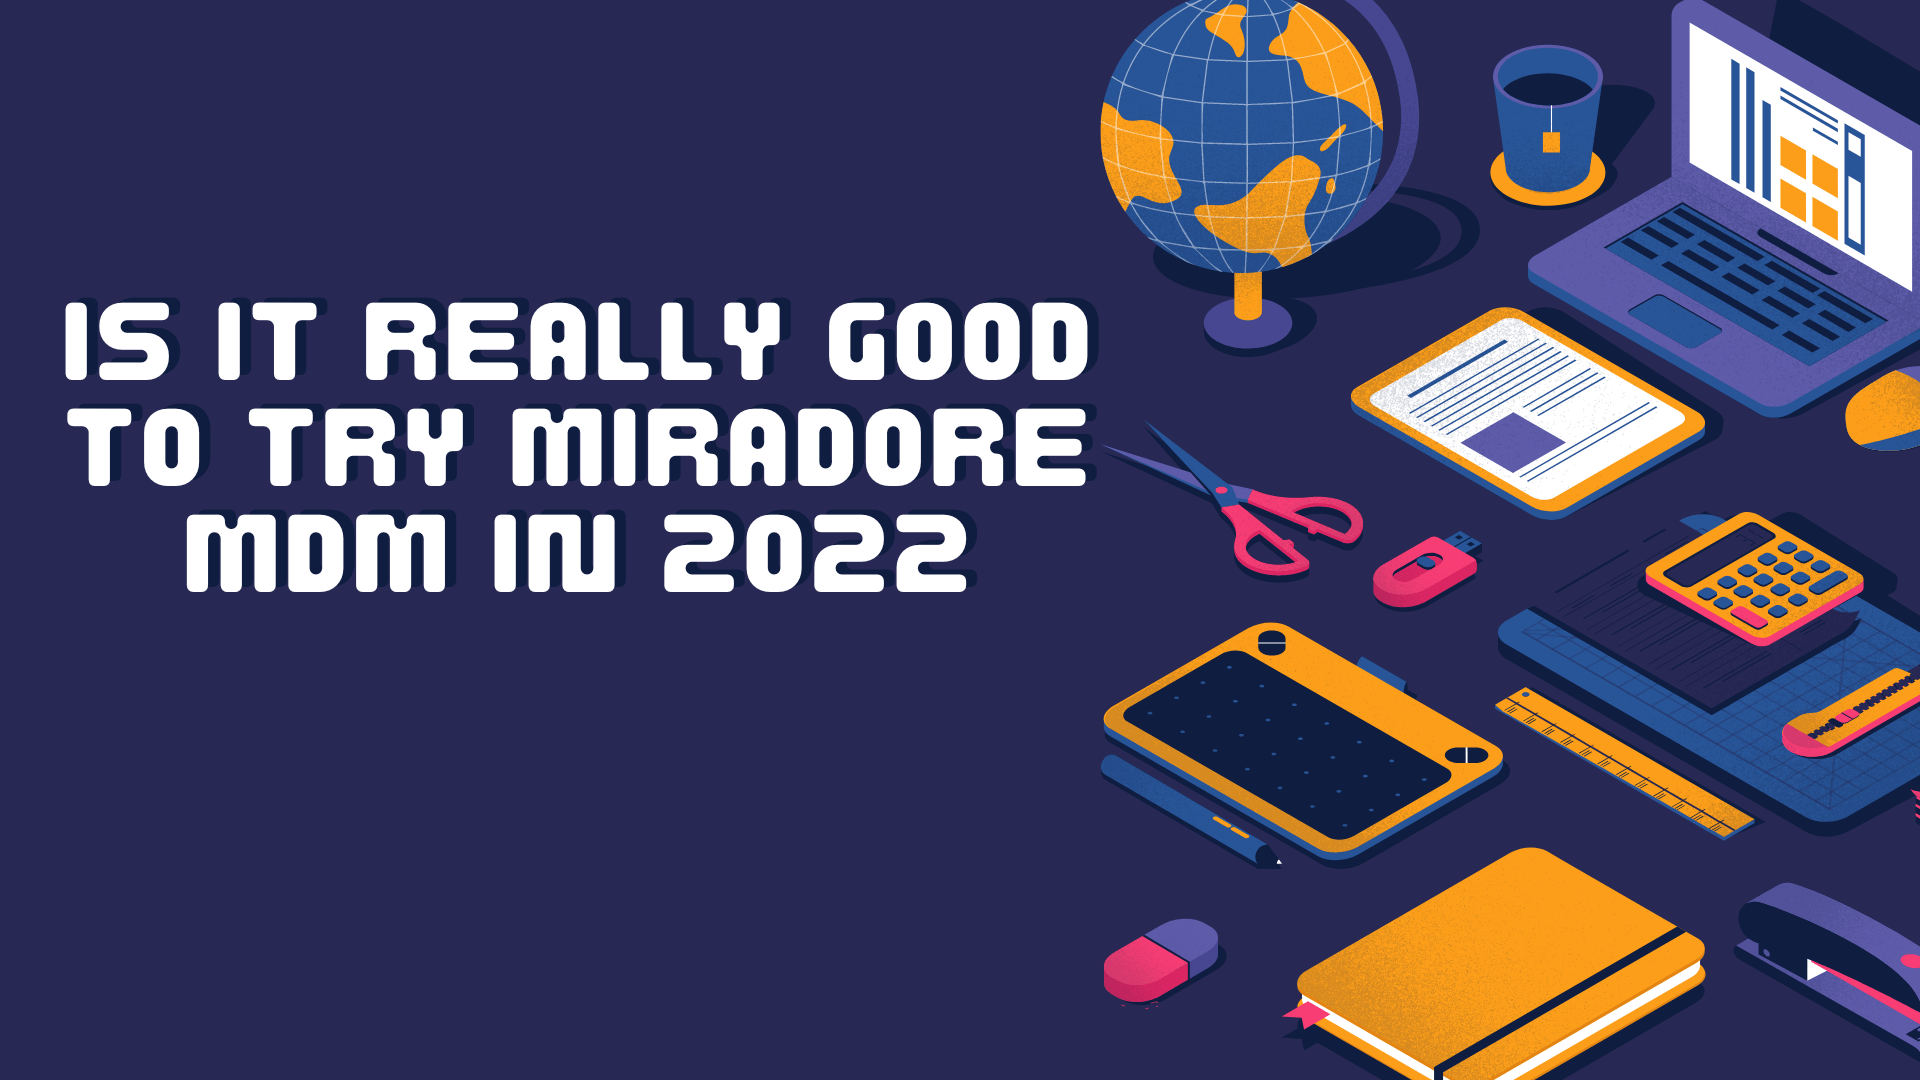 Is It Really Good To Try Miradore MDM in 2022